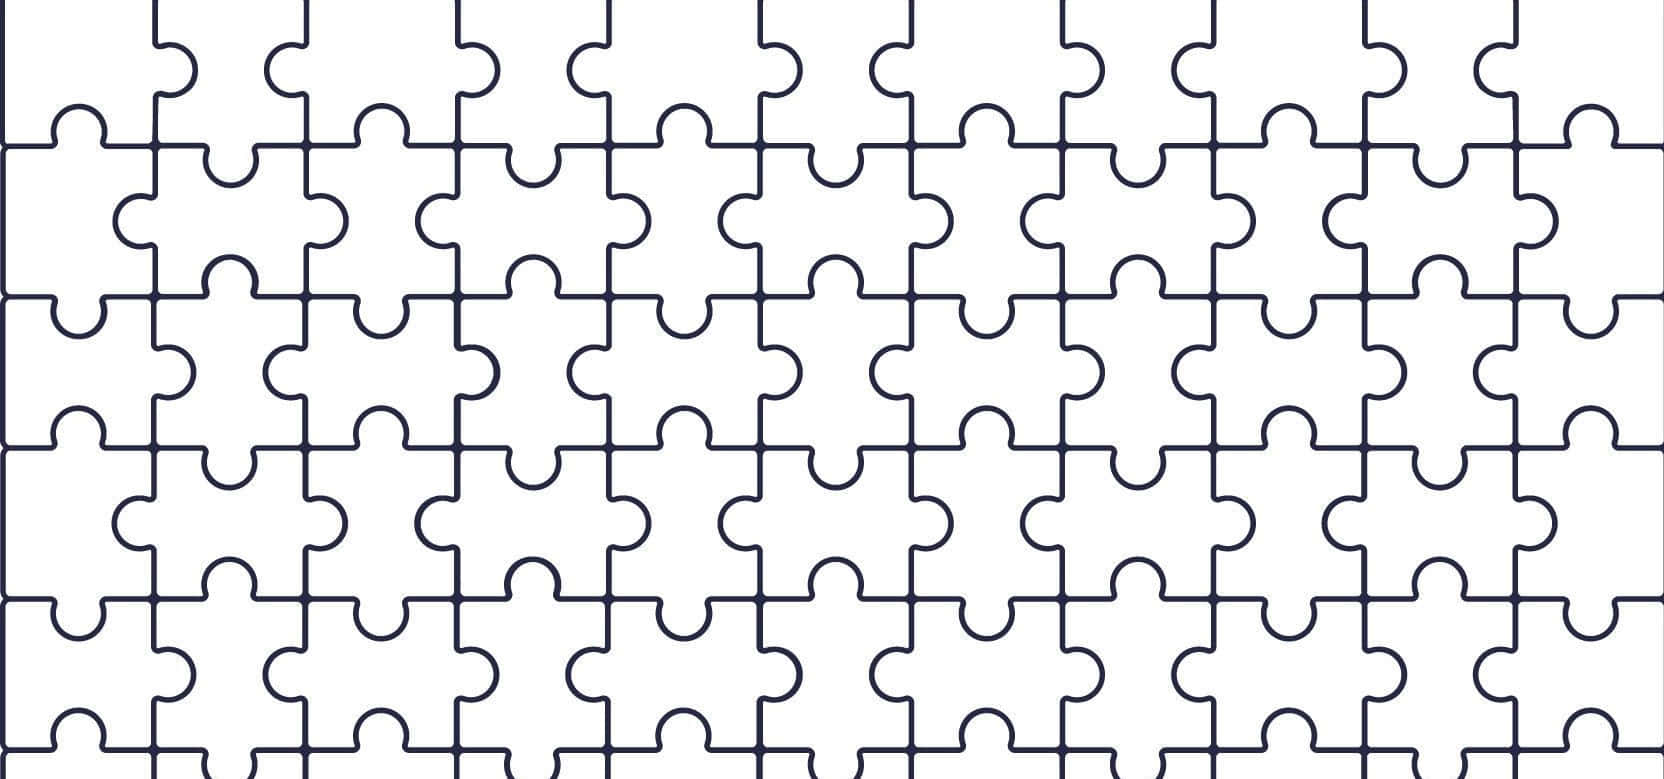 A Puzzle Piece Pattern With Blue Lines